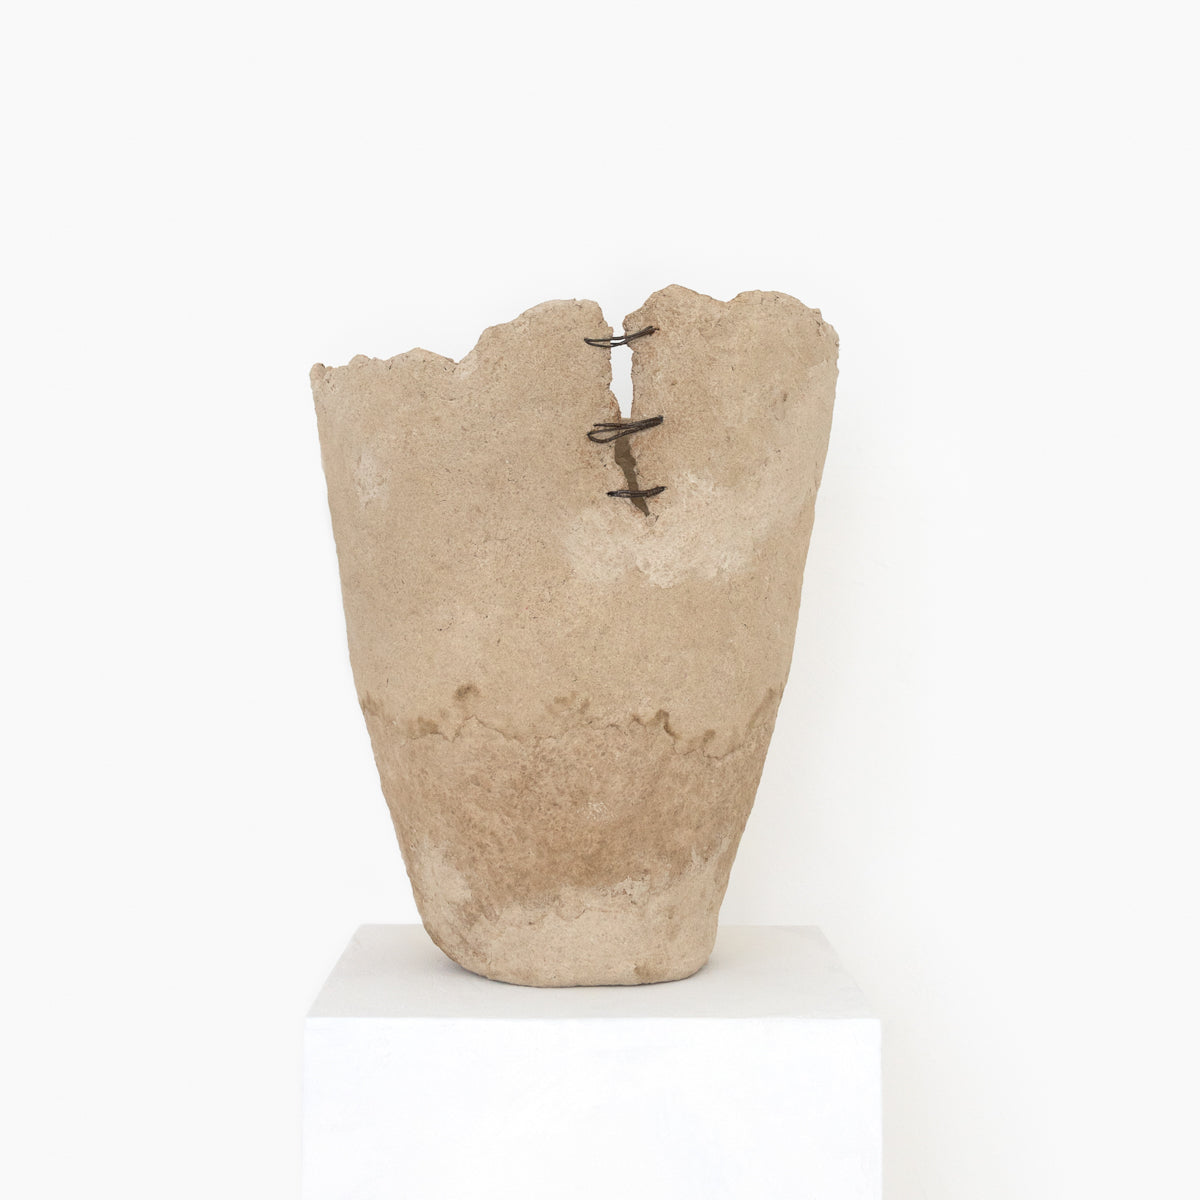 Handmade by designer Jennifer Alden, Vessel Study No. 42 is a contemporary sculpture made from paper clay and wire. Each unique vessel in this collection is one-of-a-kind, rare, and both primitive and modern. 